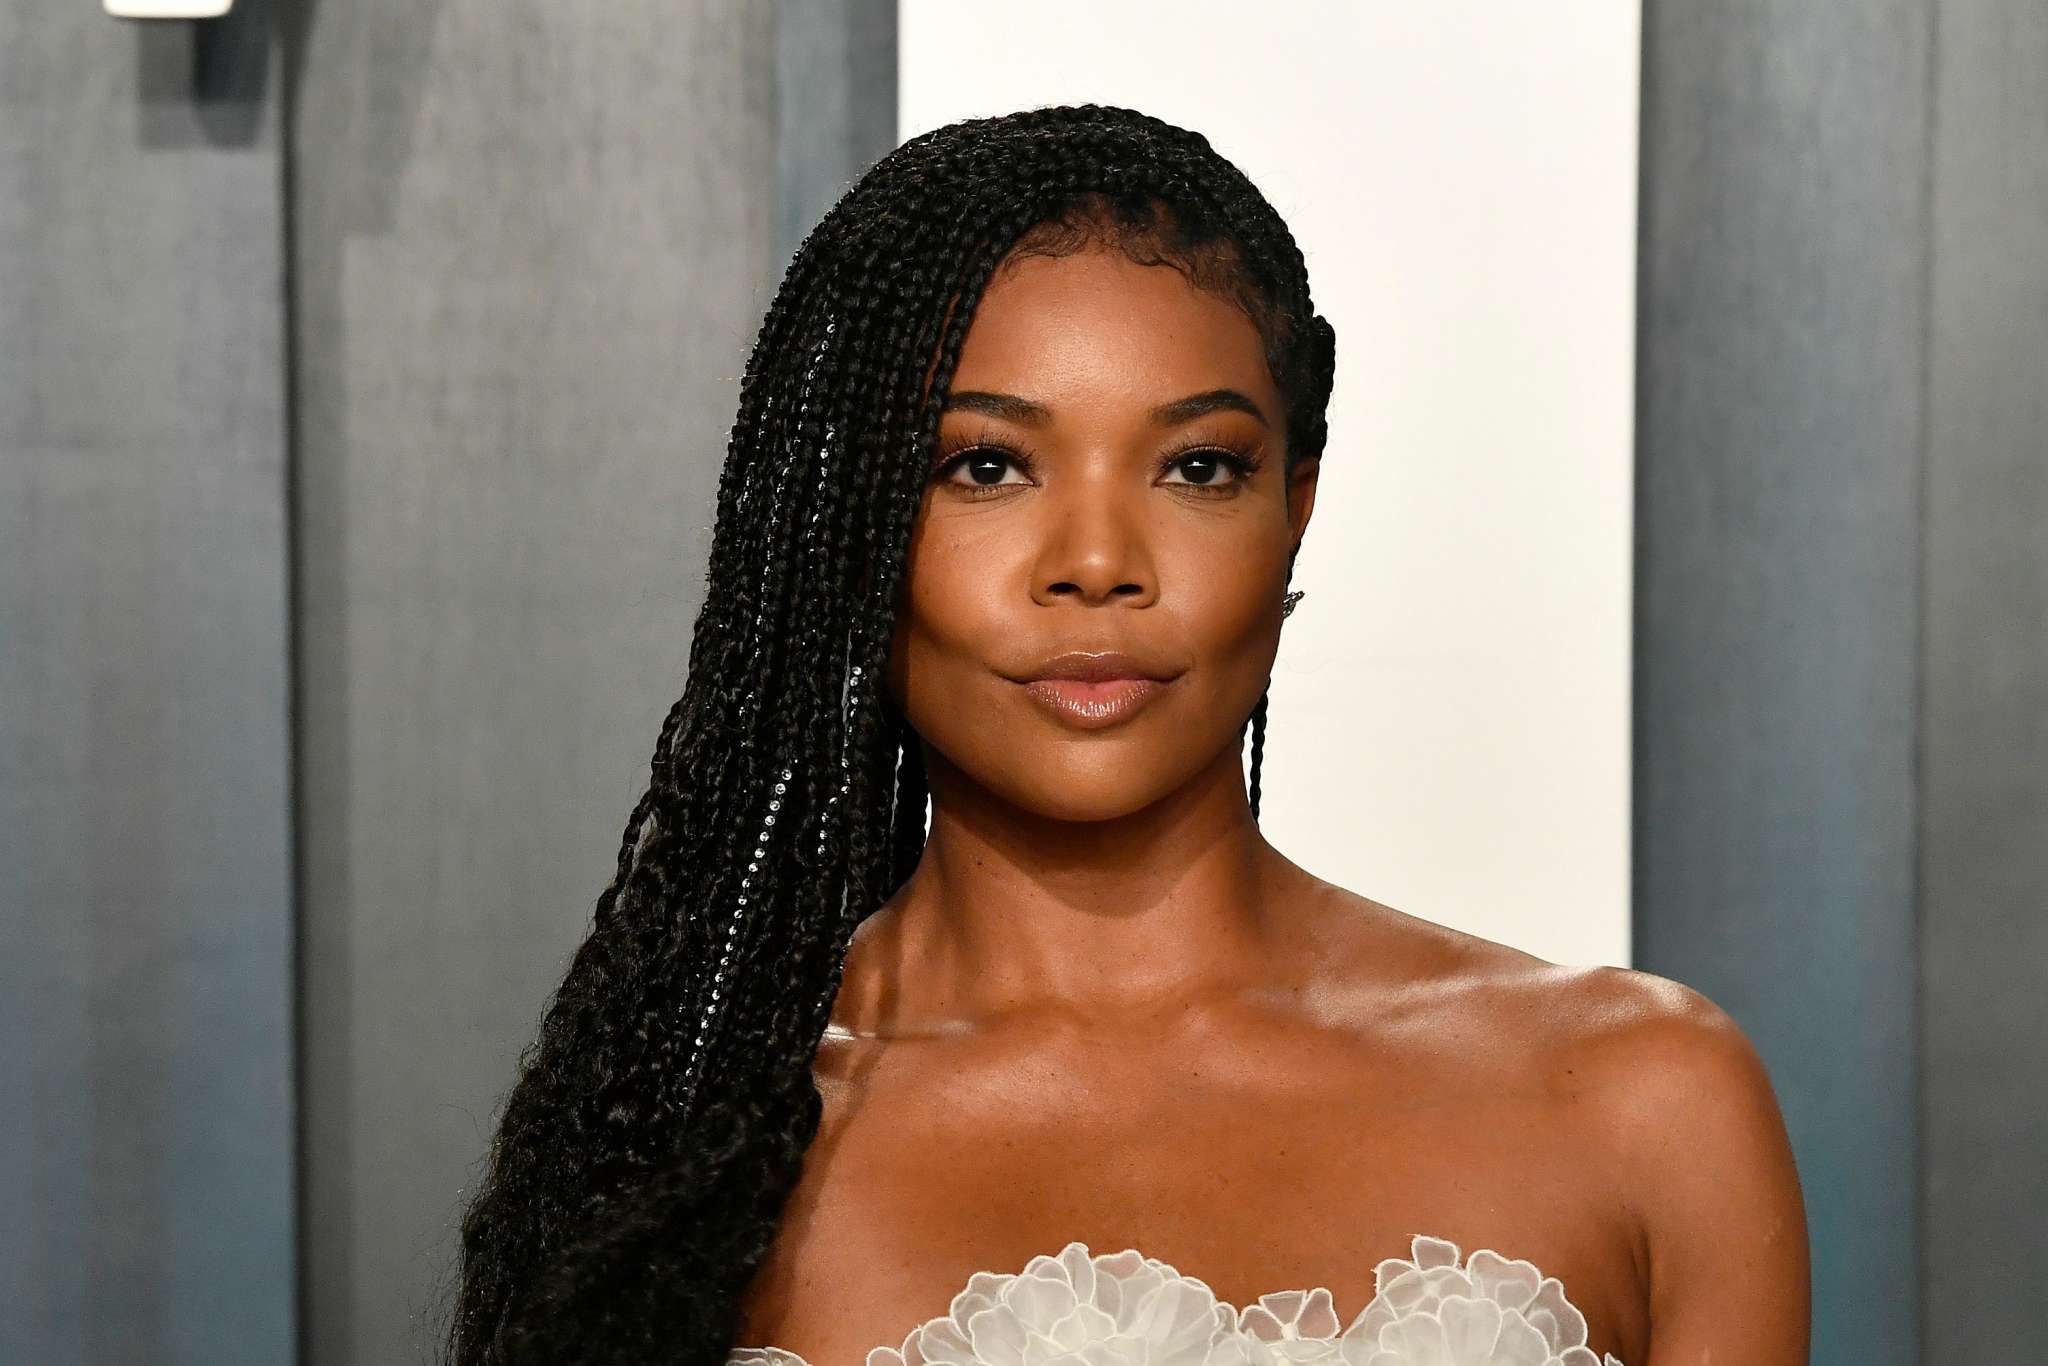 ”gabrielle-union-shares-an-amazing-workout-video-for-2022”